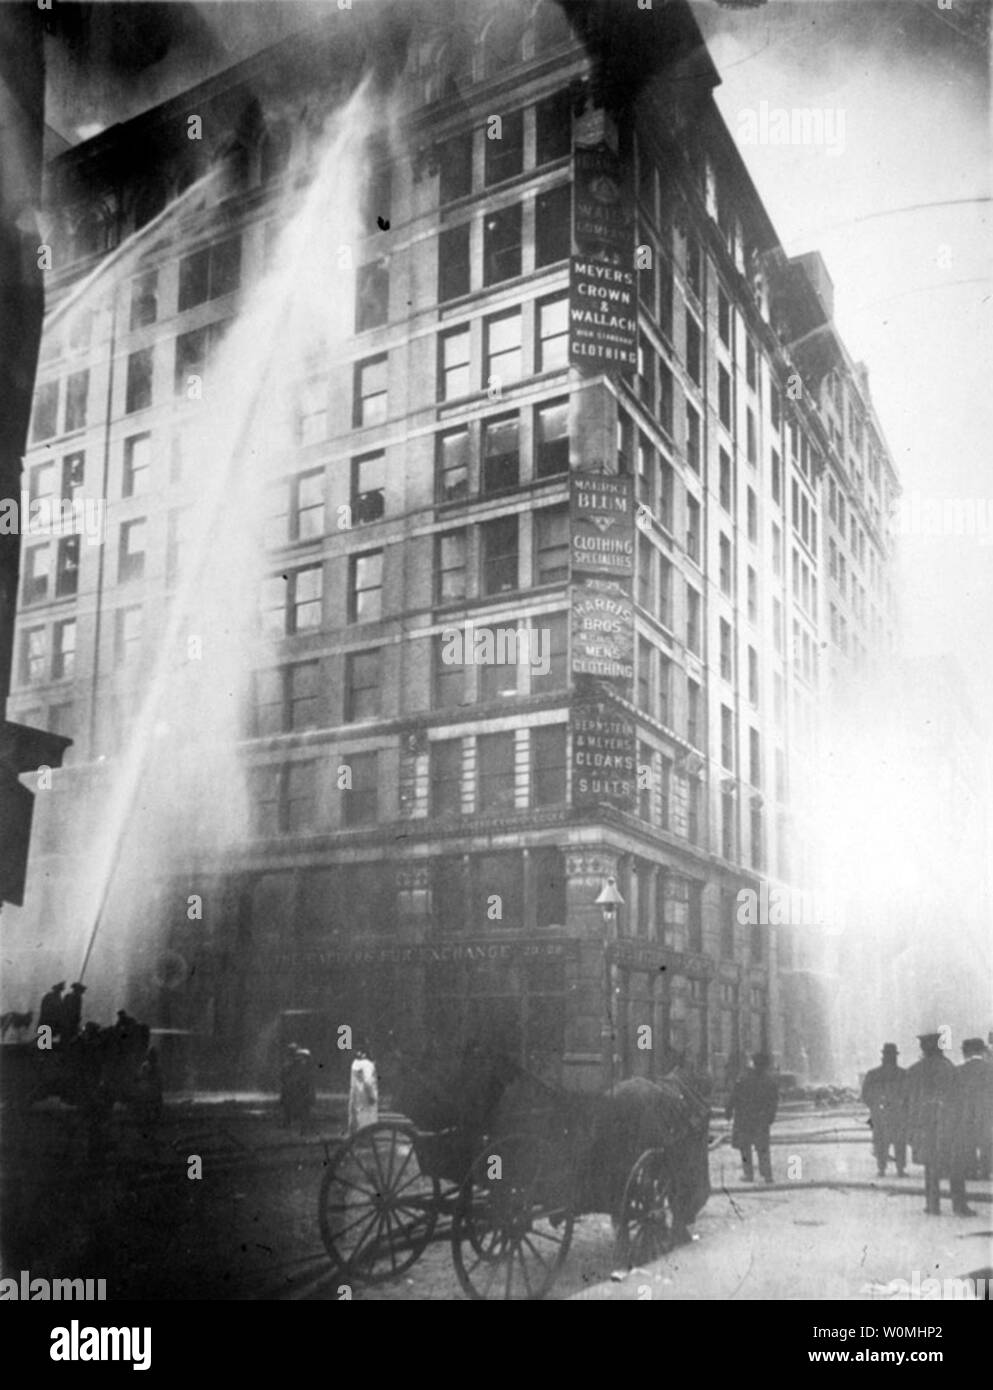 Fire fighters battle the flames at the Triangle Shirtwaist Factory fire on March 25, 1911 in New York, New York. March 25, 2011 is the 100th anniversary of the fire when 146 factory workers died after building mangers locked doors leading to all exits. Eye witness accounts by United Press reporter William G. Shepherd along with other reports during the following days and weeks brought the conditions of garment worker into public scrutiny.   UPI/Cornell University Stock Photo